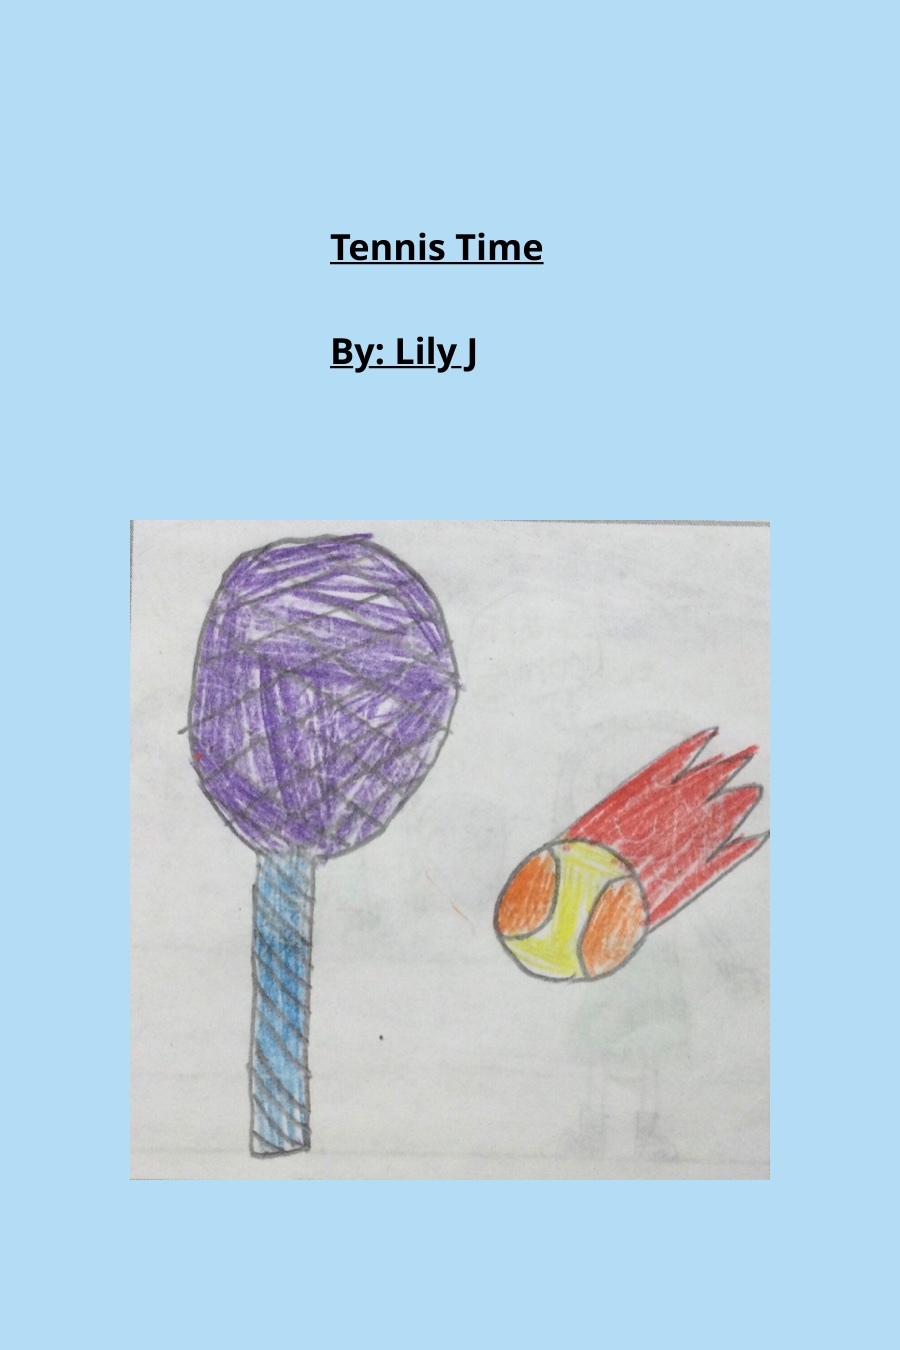 Tennis Time by Lily J